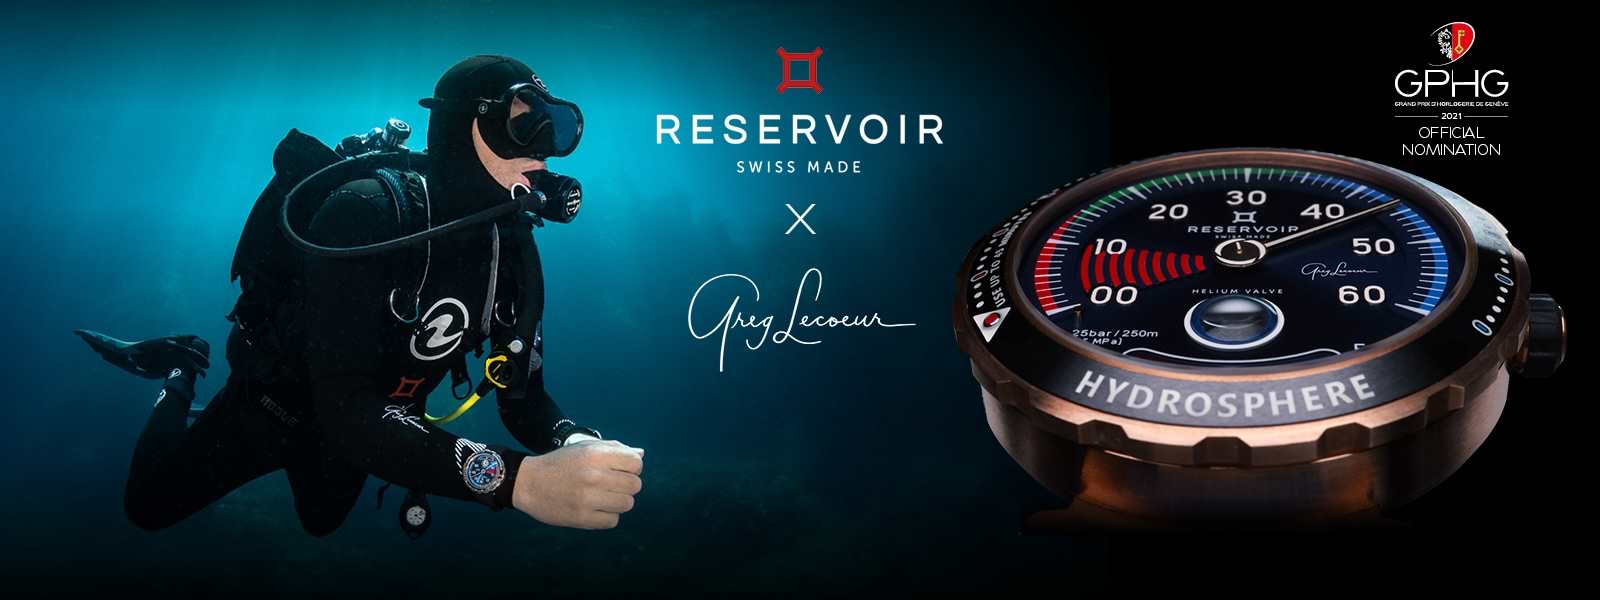 Luxury Diver's Watch with Navy Blue, Light Grey and Light Sky Blue by Greg Lecoeur Manometer.